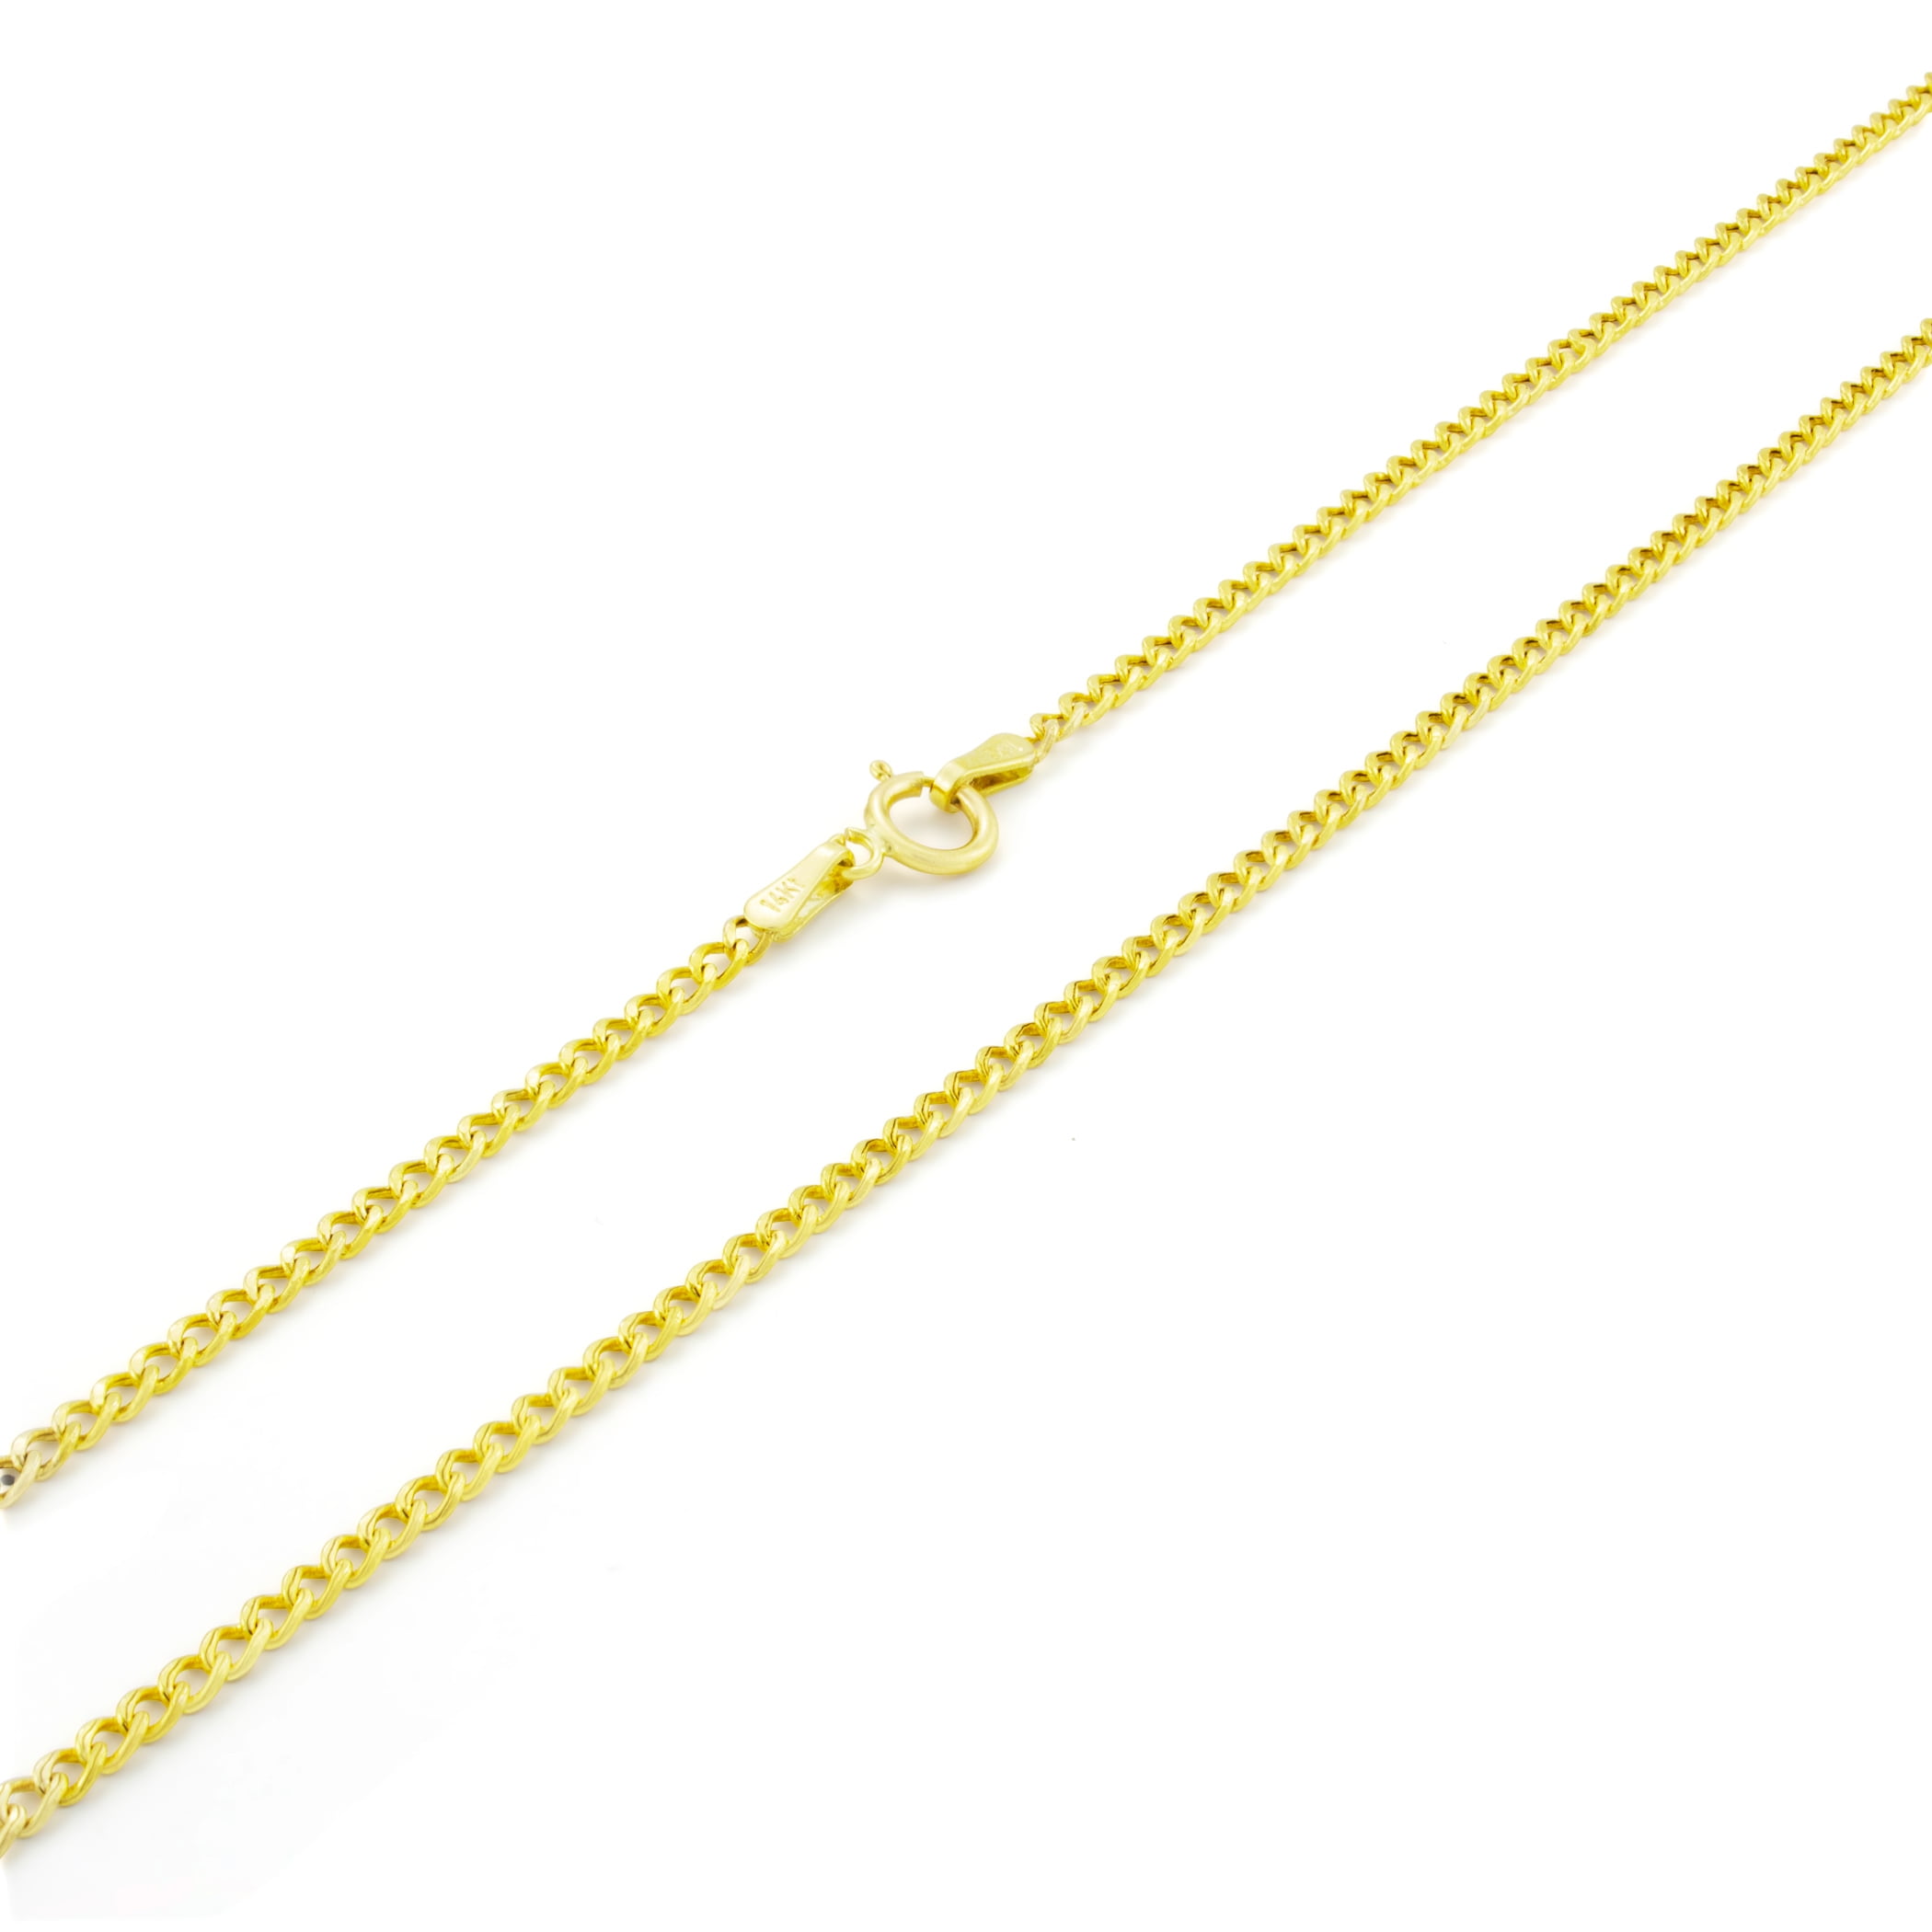 Real 14k Gold 2mm FLAT CABLE Chain Pure 14k yellow gold 